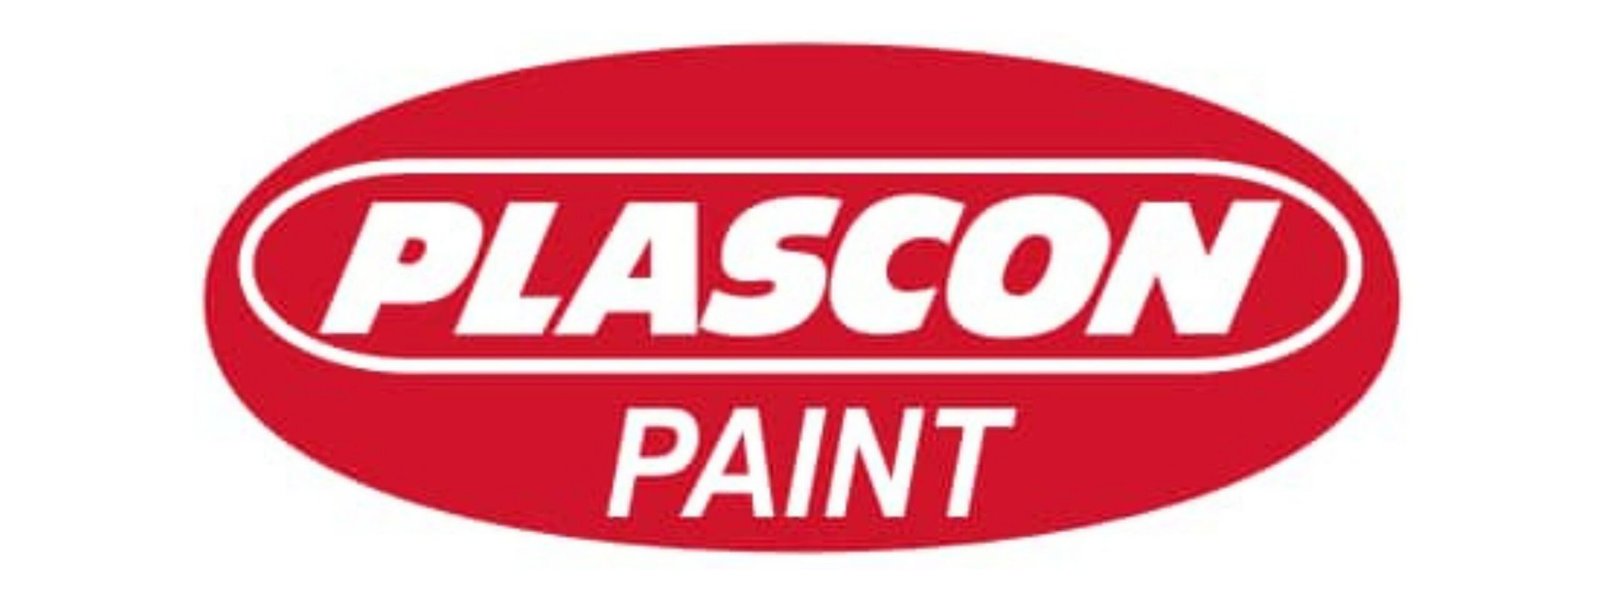 Art Fusion Lagos NG Collaborations with plascon paint